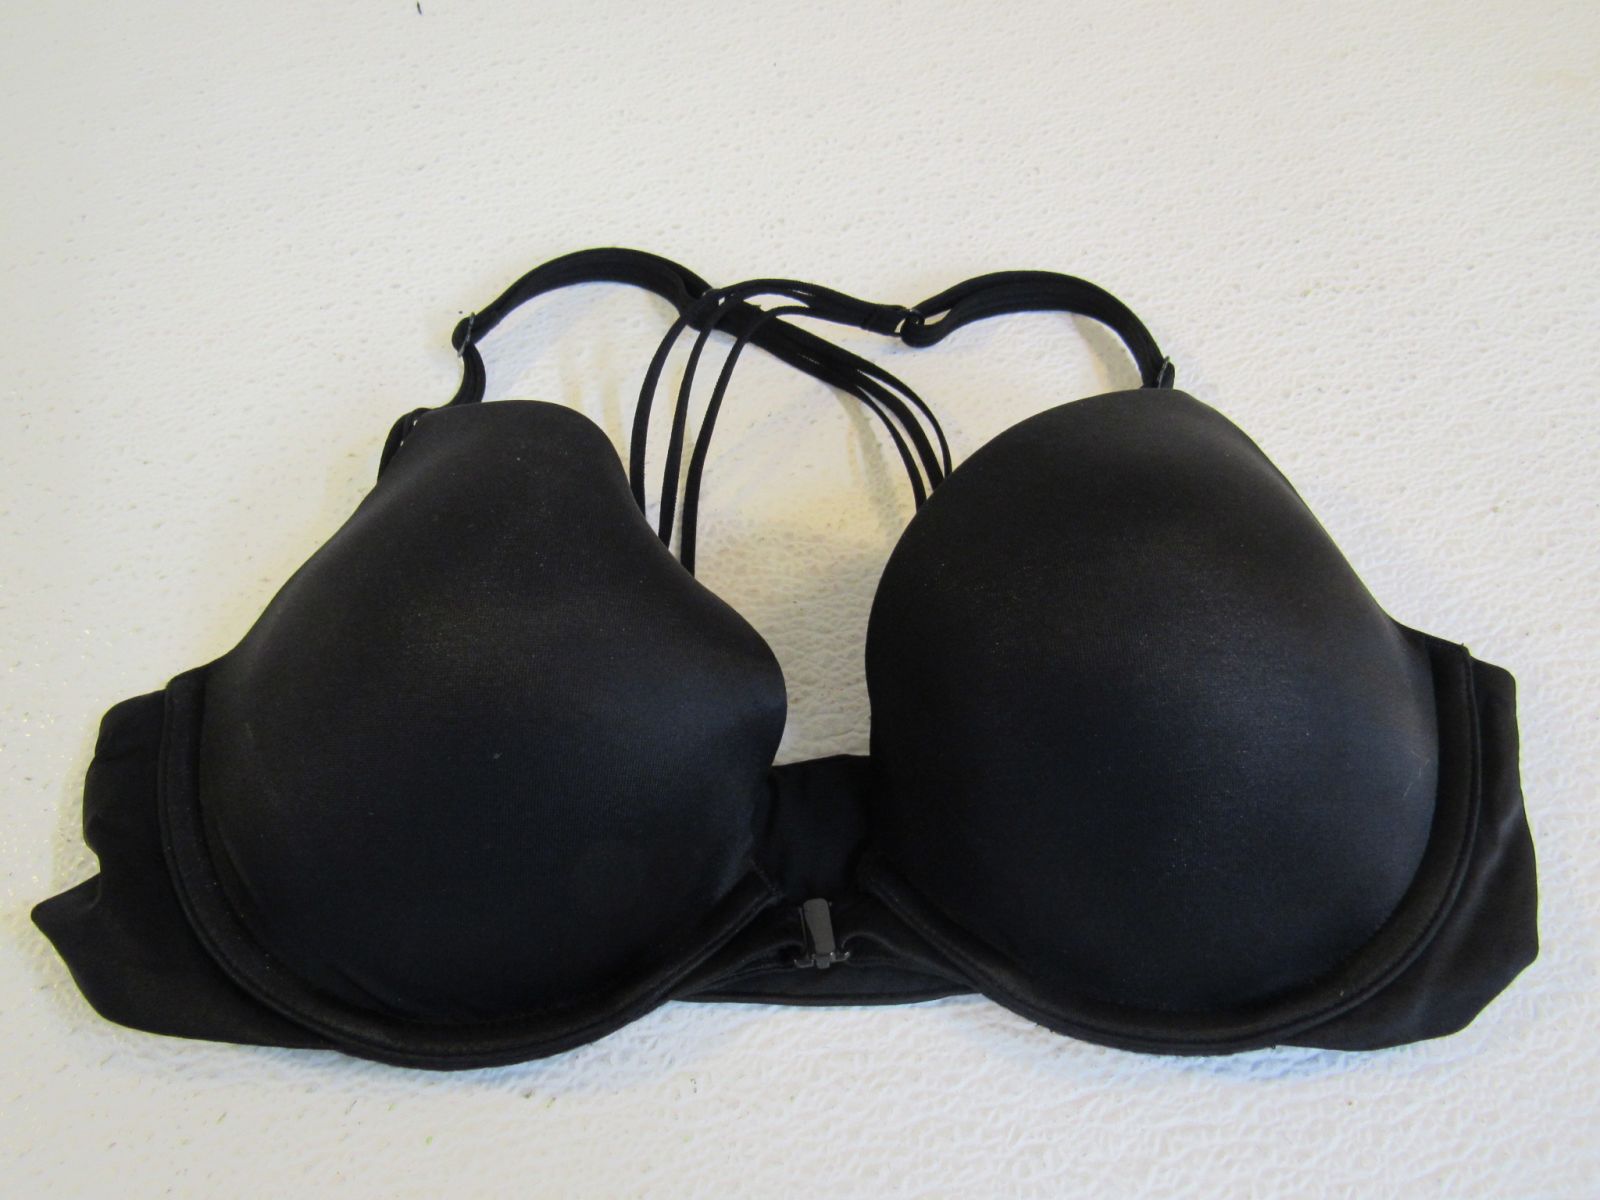 NWT Youmita EXTREME Push up 5-way Bra 34C, Black, ADDS CUP Size